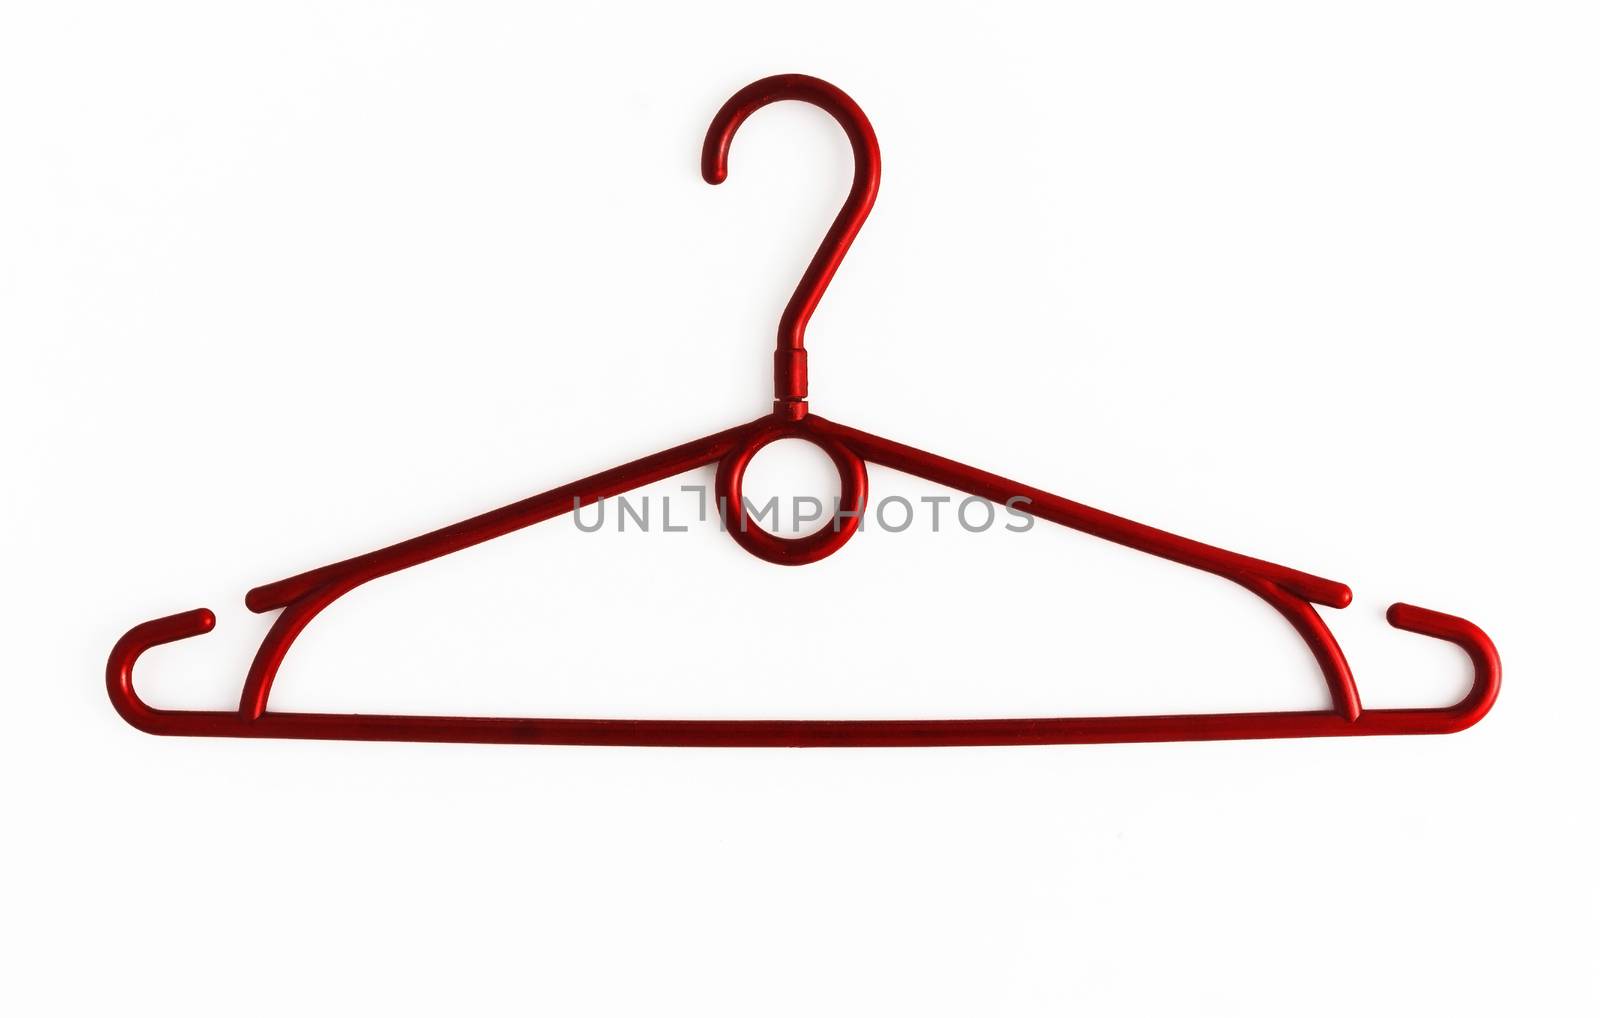 One colored plastic hanger, isolated on white background, close-up.